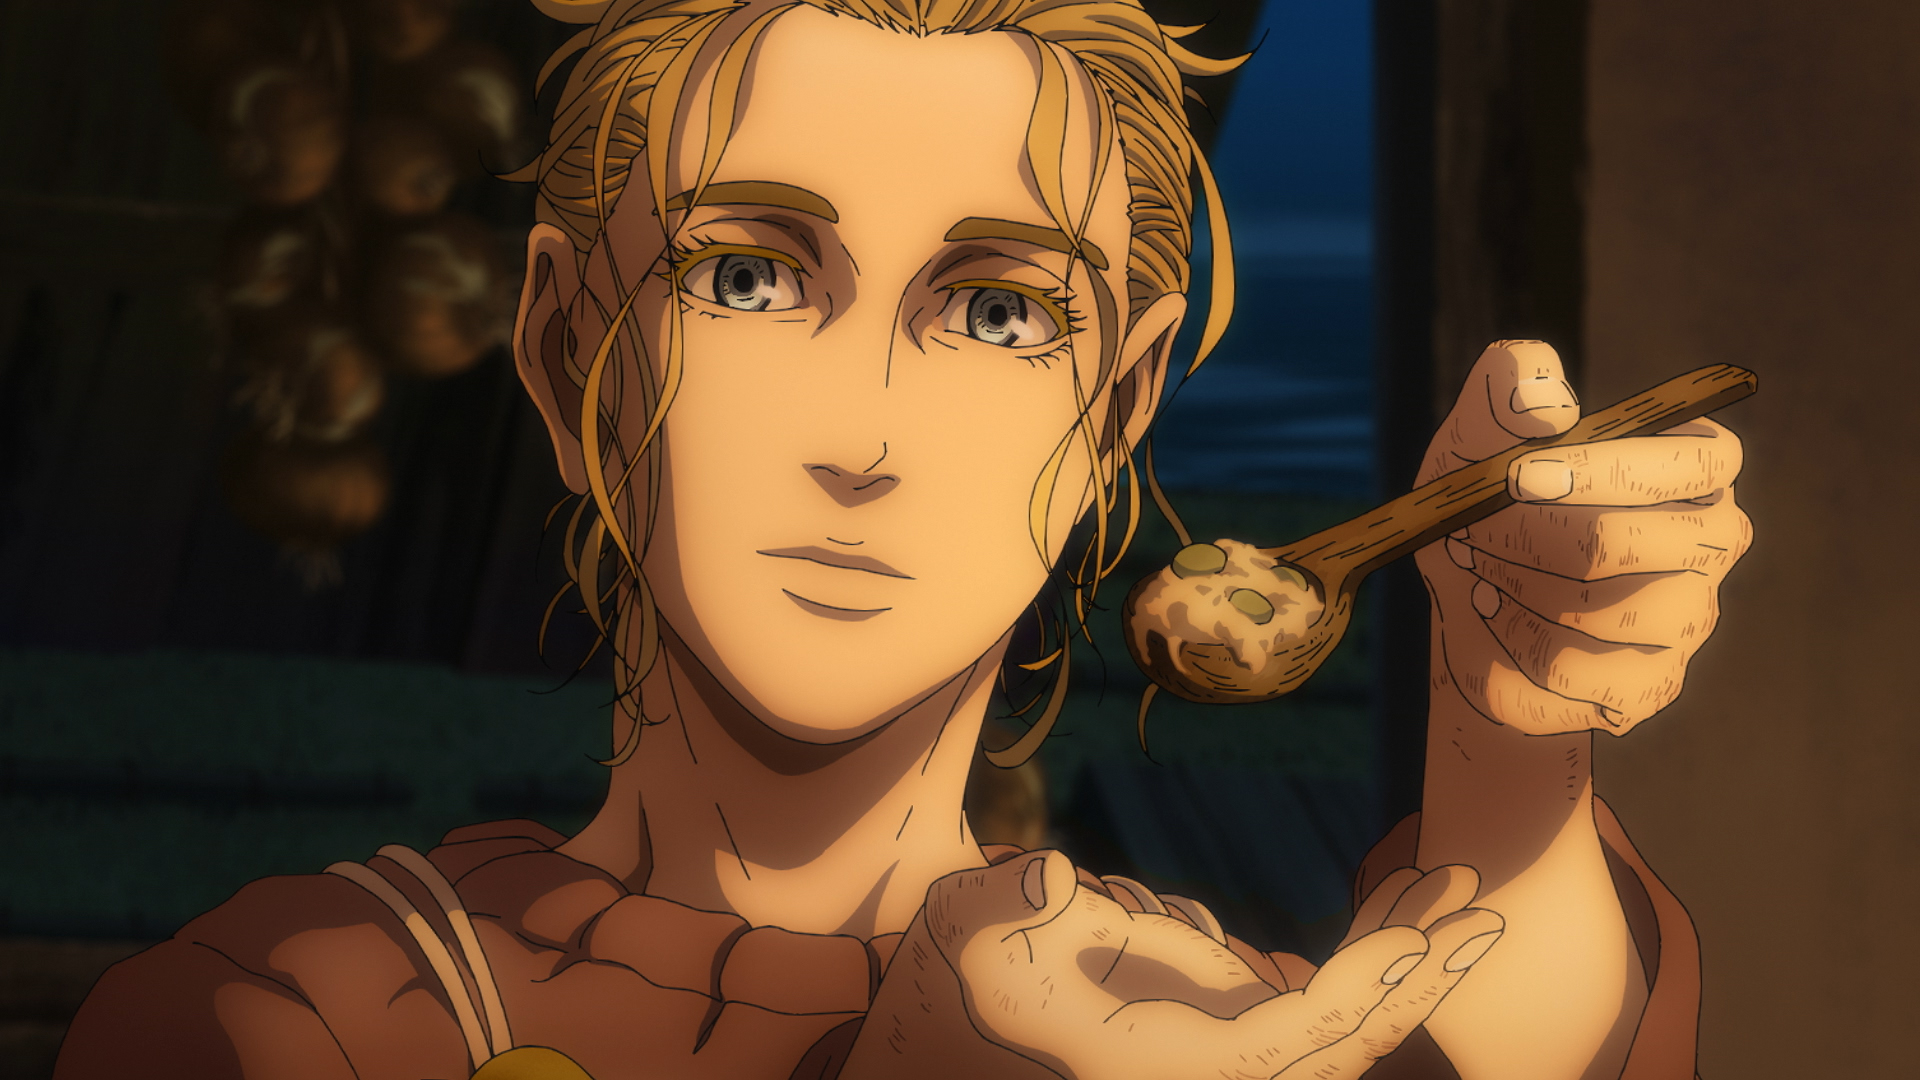 Anime Corner News on X: OFFICIAL: VINLAND SAGA Season 2 has revealed new  trailers for the 2nd cour, featuring the new opening and ending songs! OP:  Paradox by SURVIVE SAID THE PROPHET